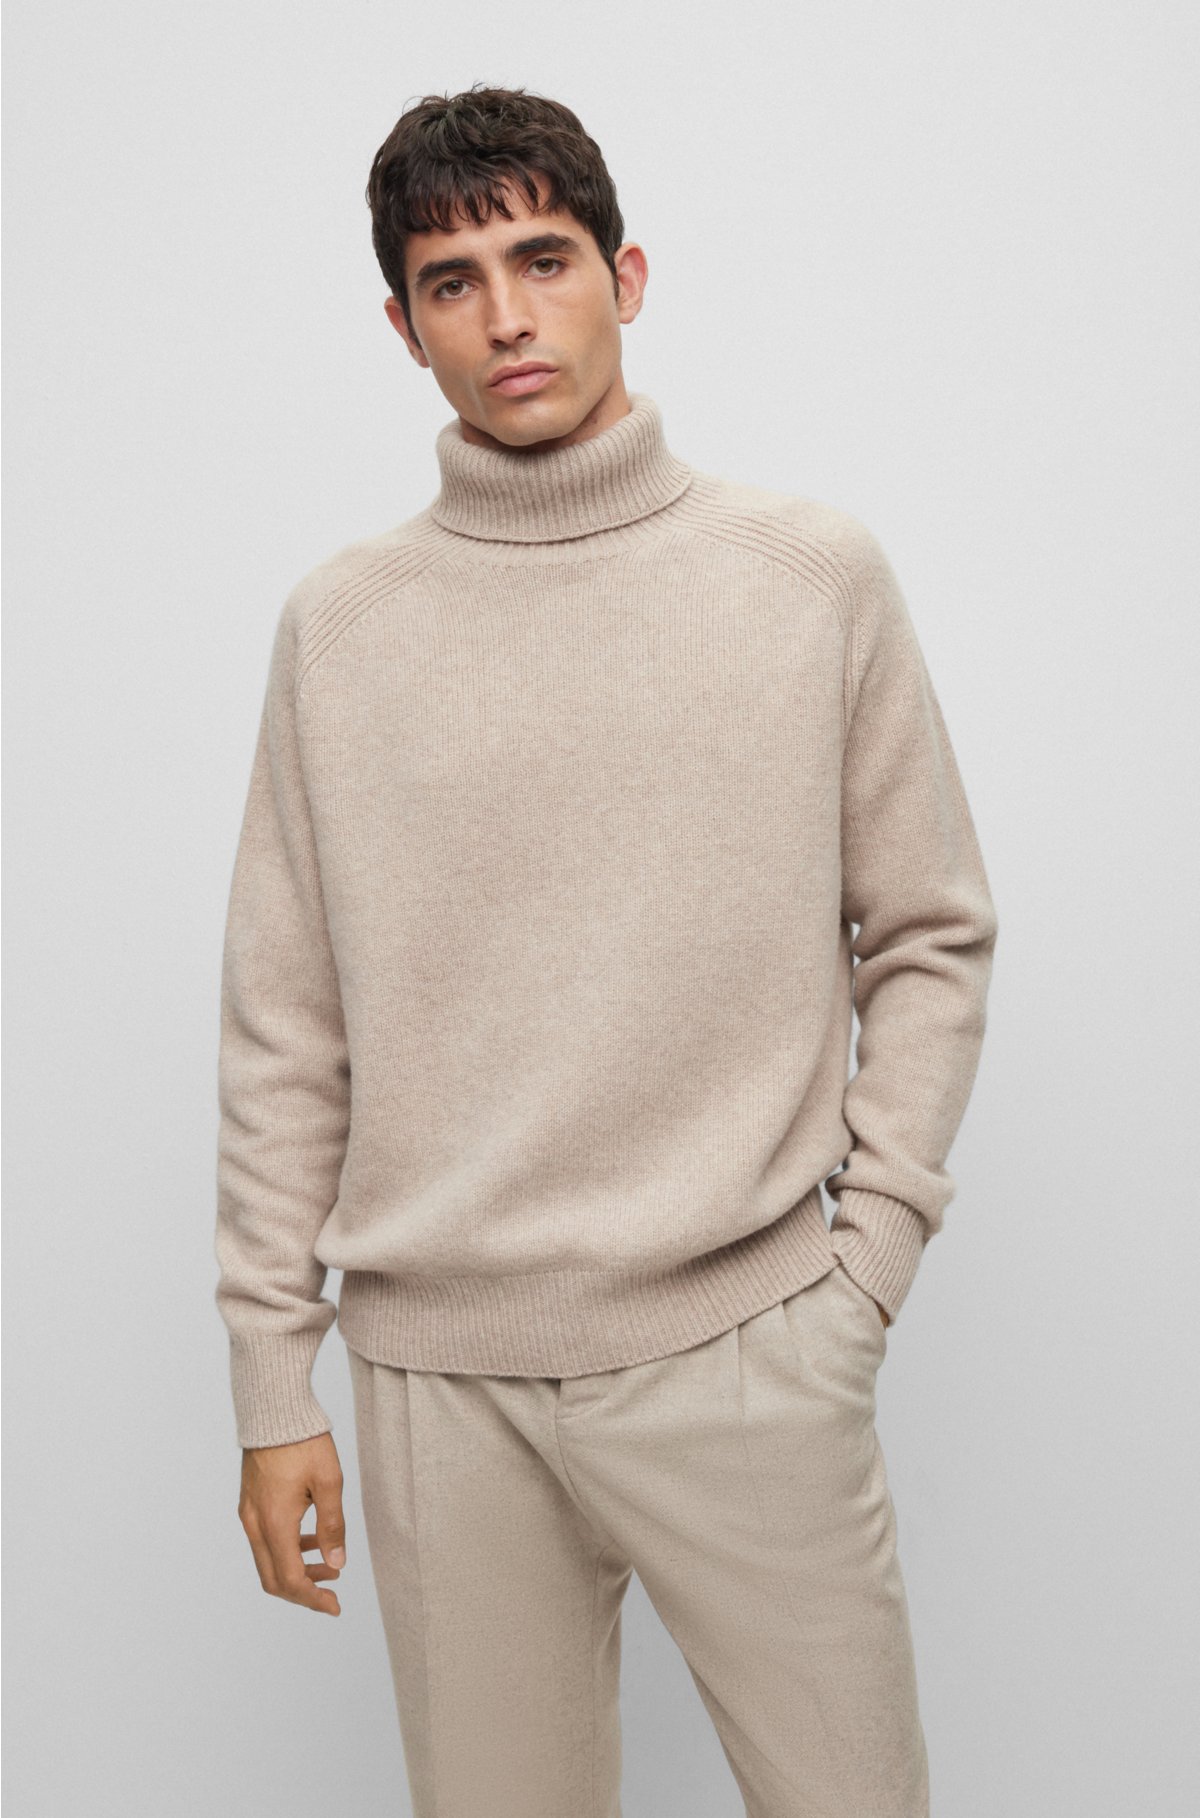 BOSS - All-gender relaxed-fit sweater in virgin wool